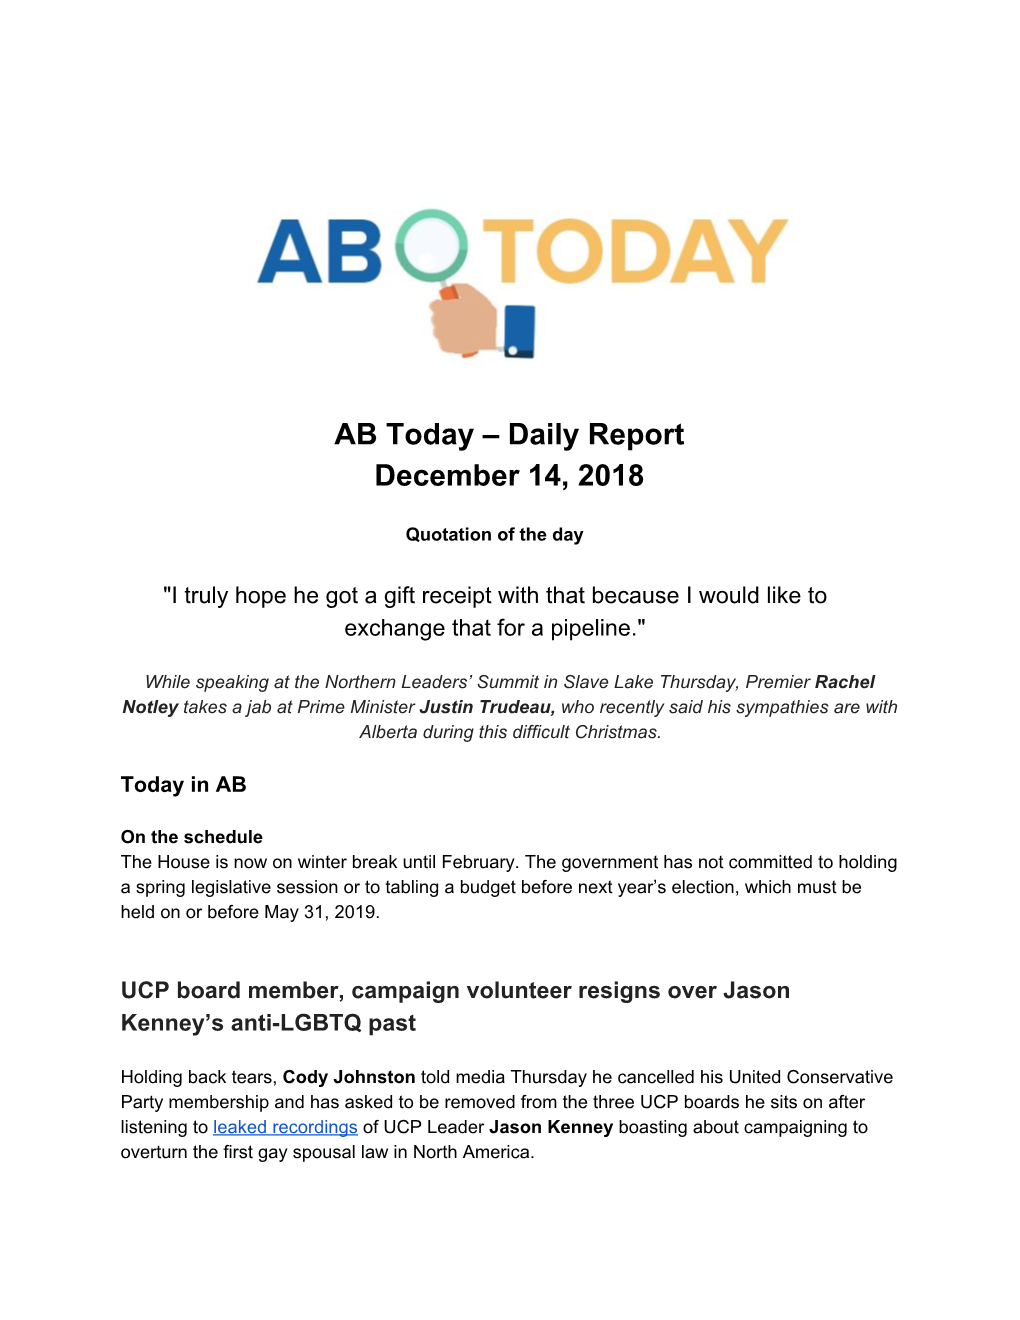 AB Today – Daily Report December 14, 2018